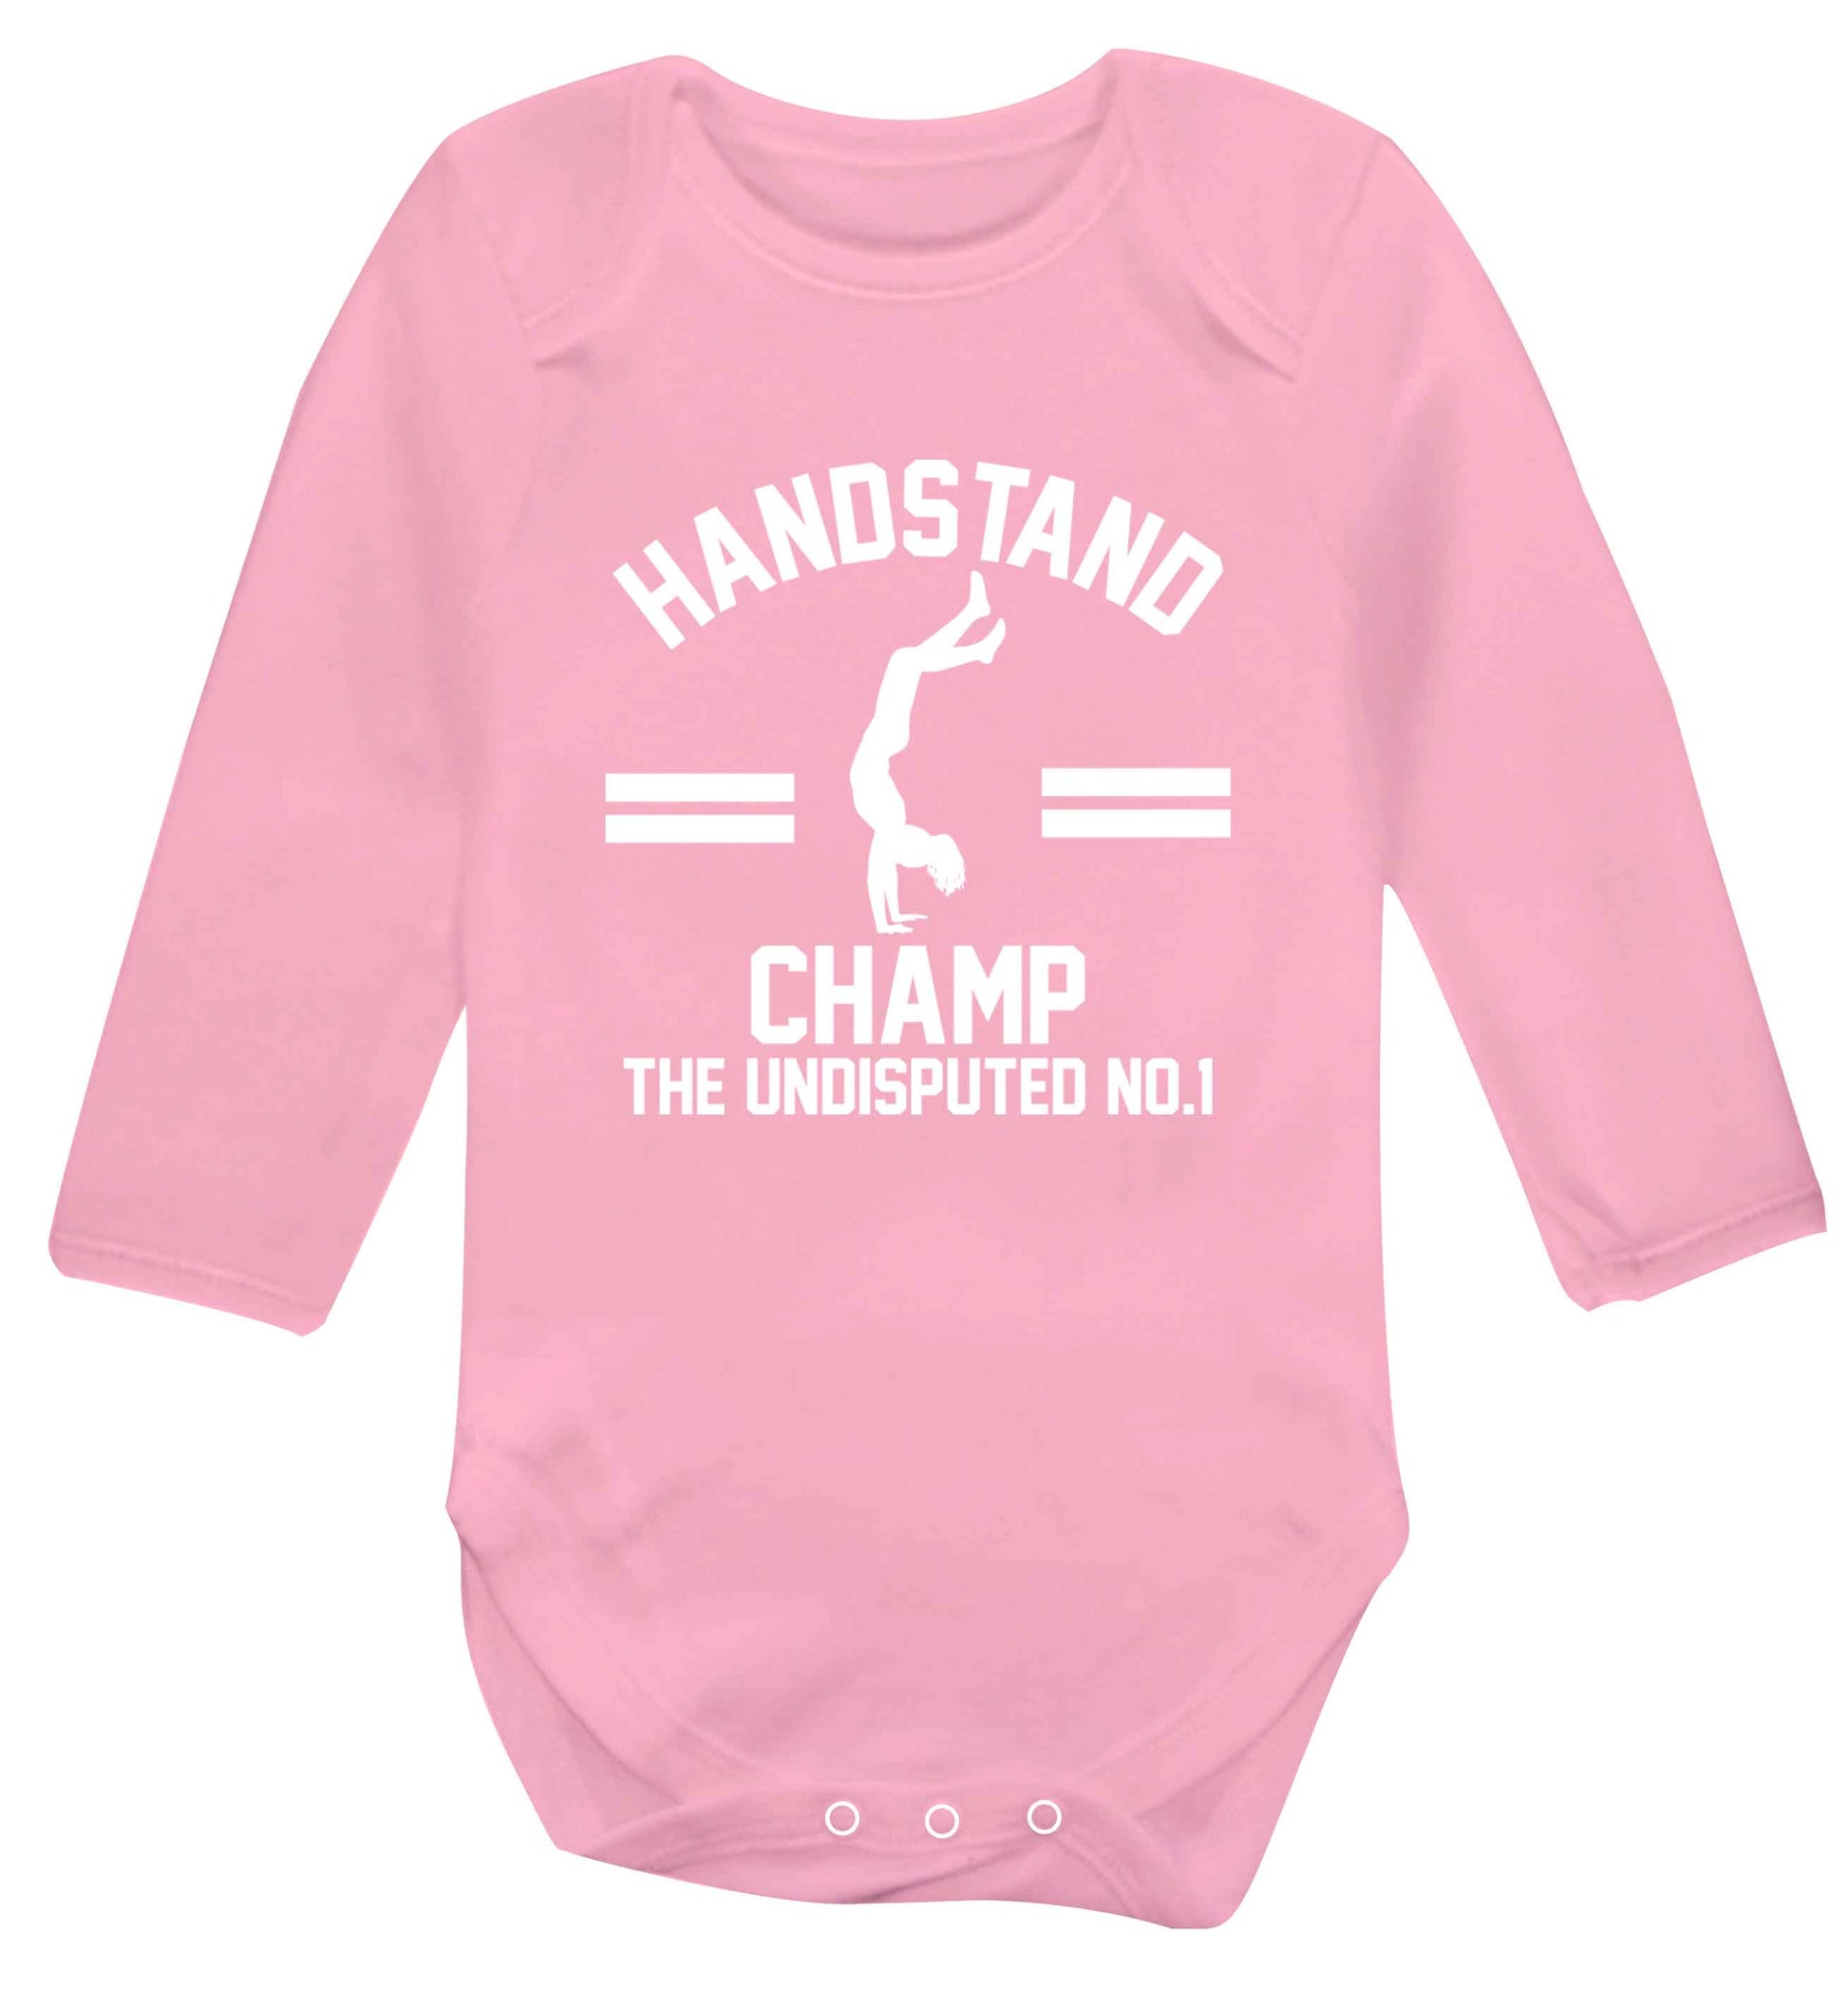 Undisputed handstand championship no.1  Baby Vest long sleeved pale pink 6-12 months